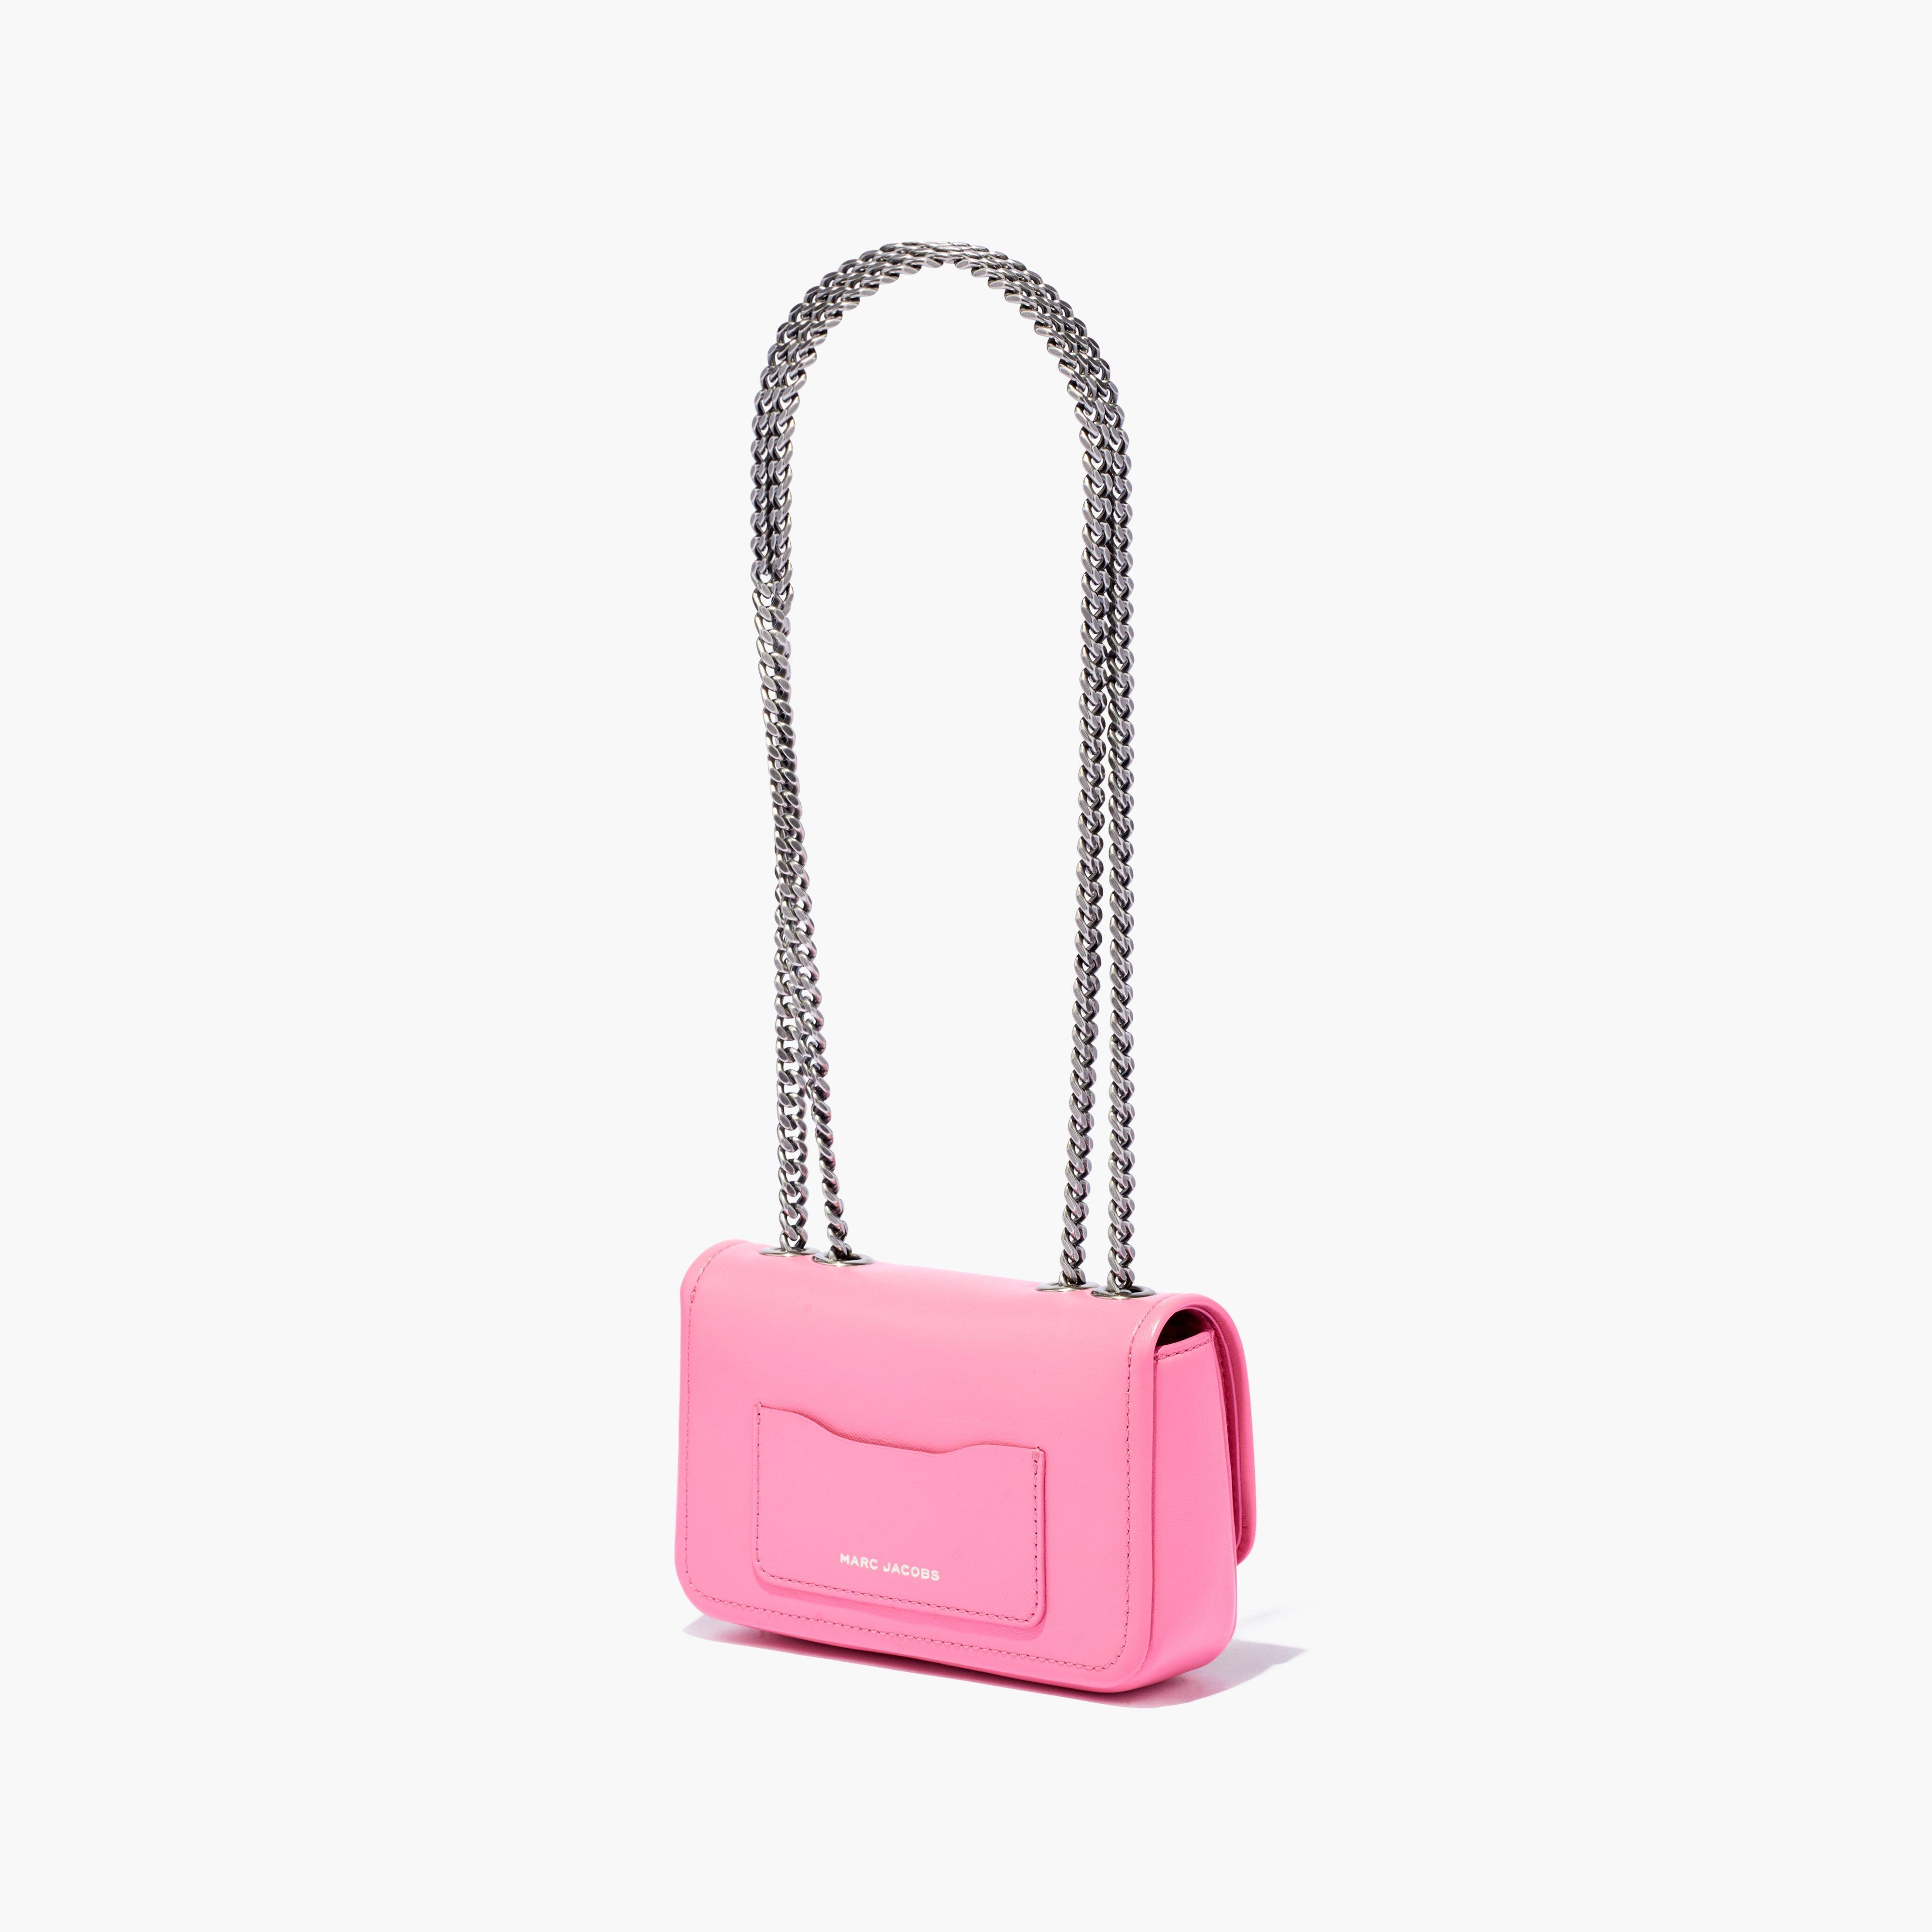 Marc Jacobs The Tote Bag mini in Morning Glory 